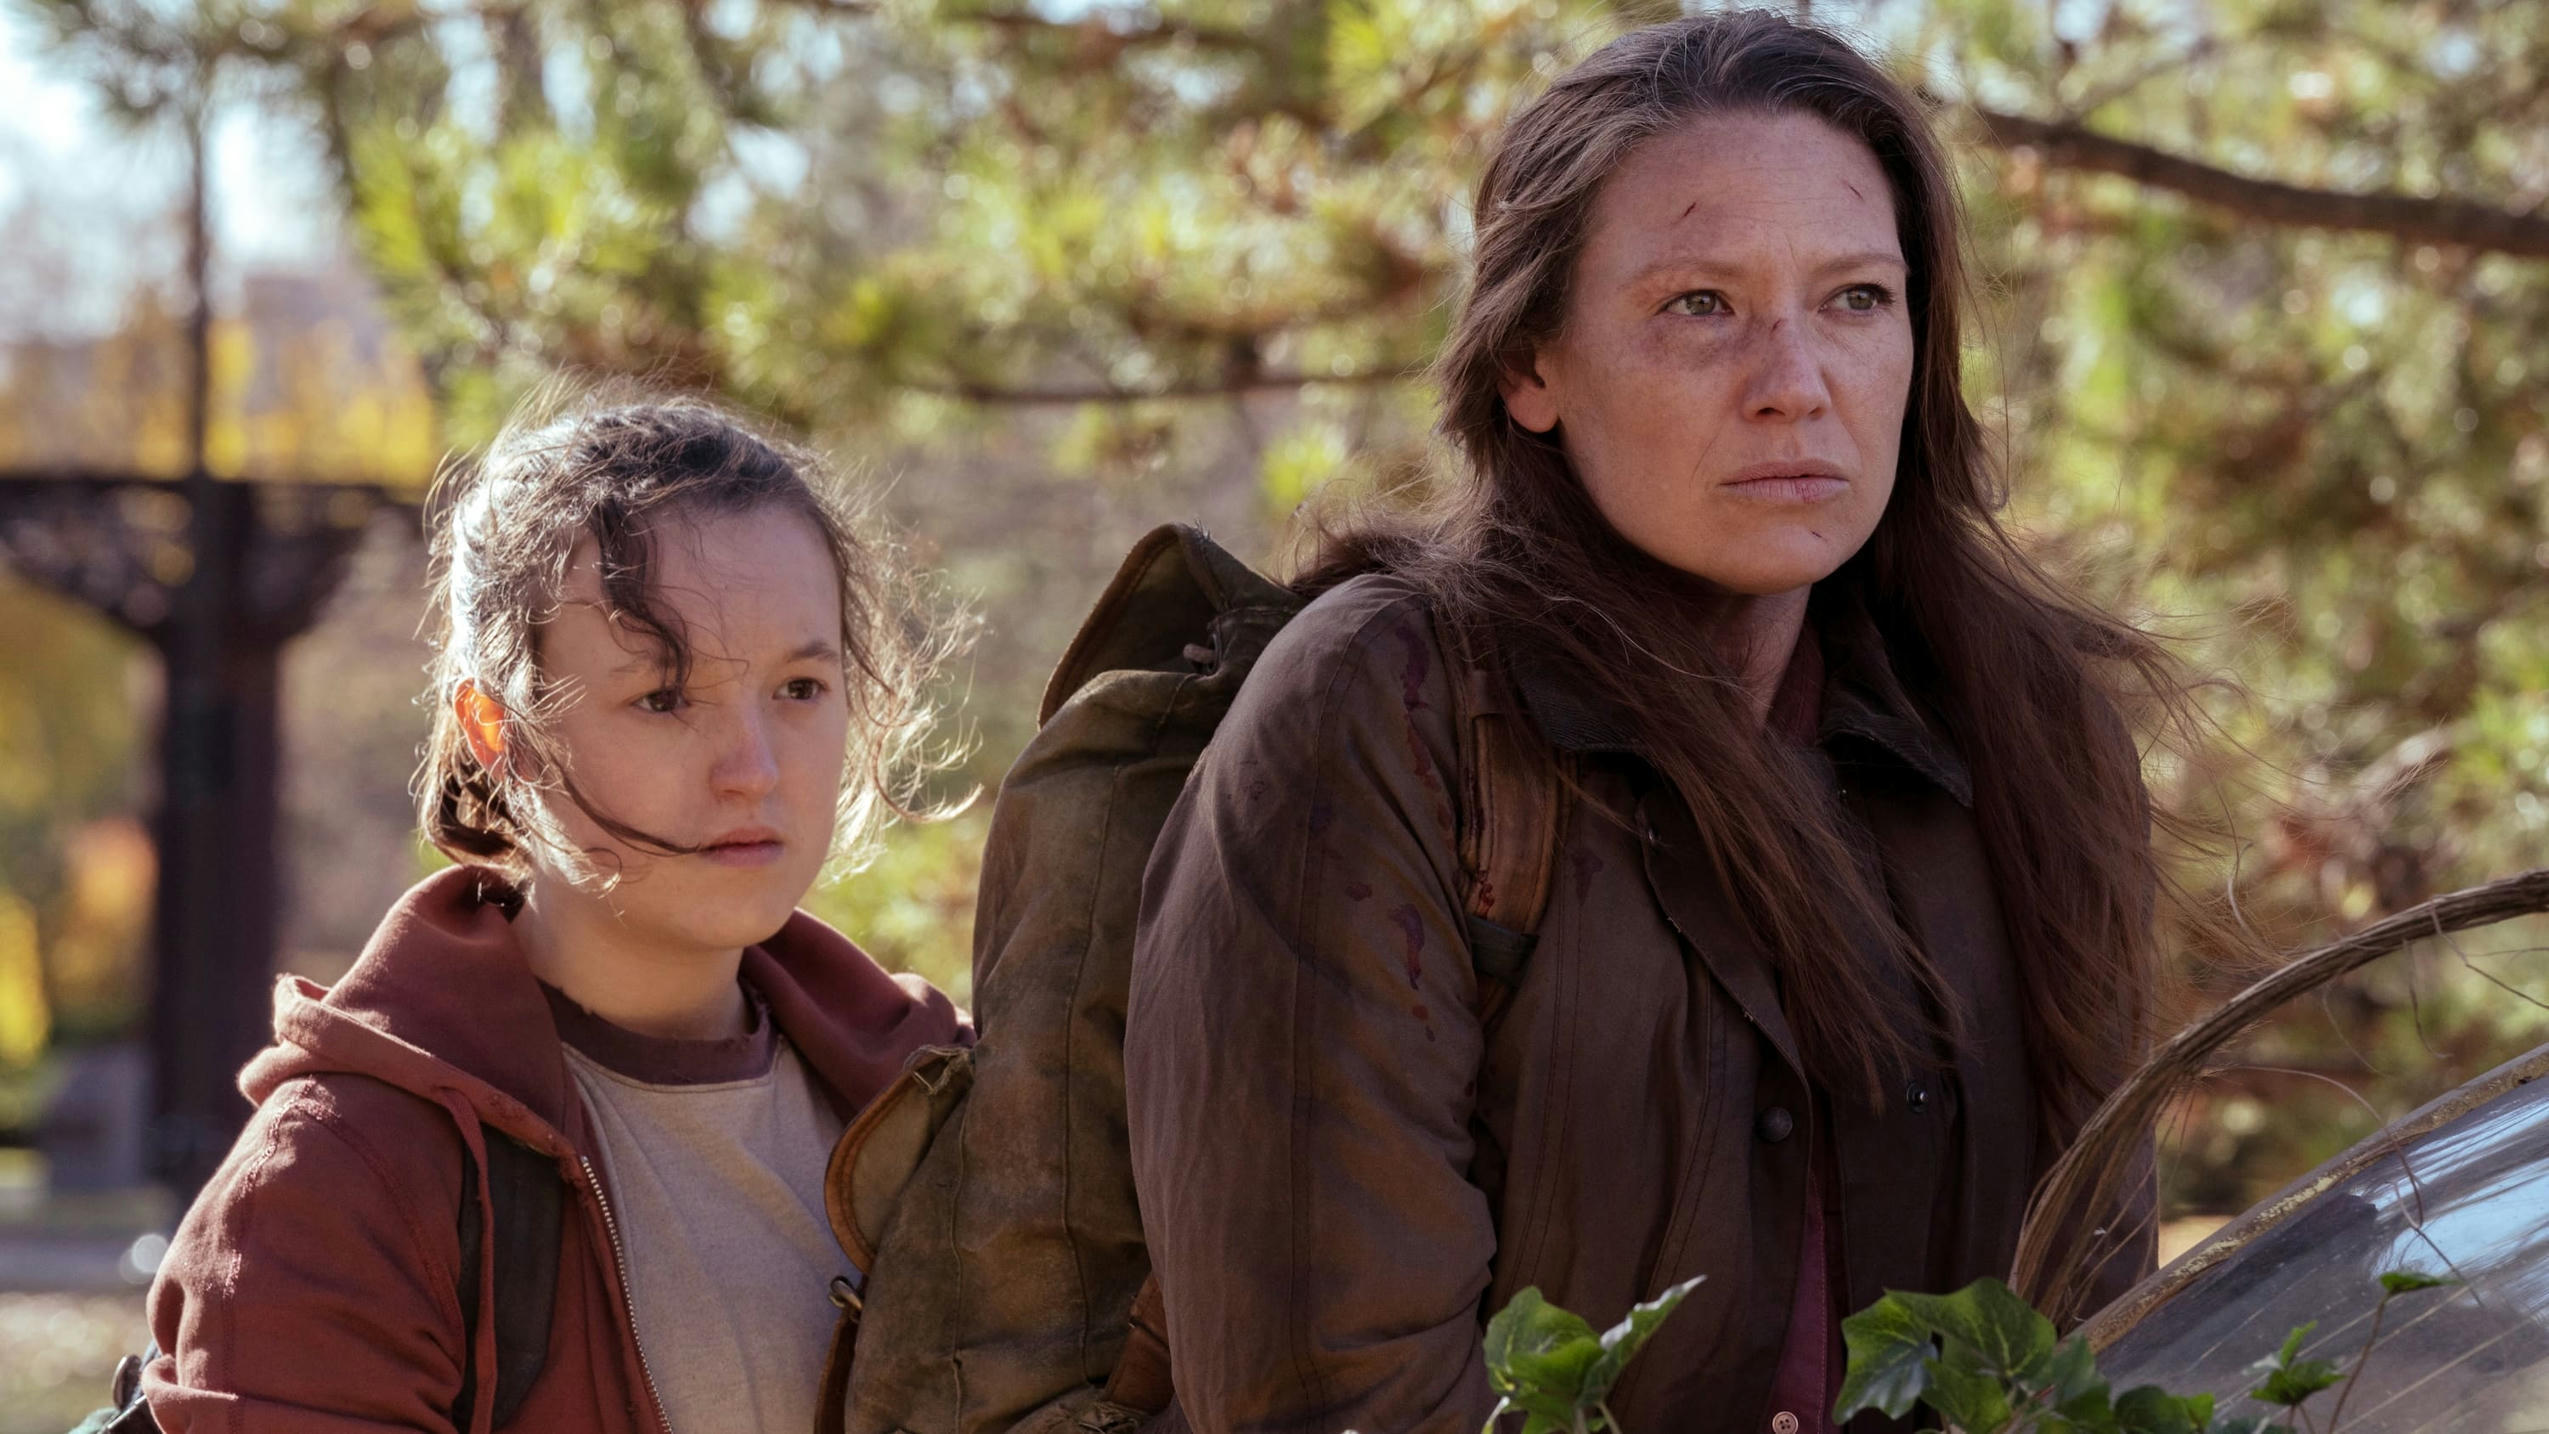 The Last Of Us' Episode 2 Breaks Viewership Records for HBO